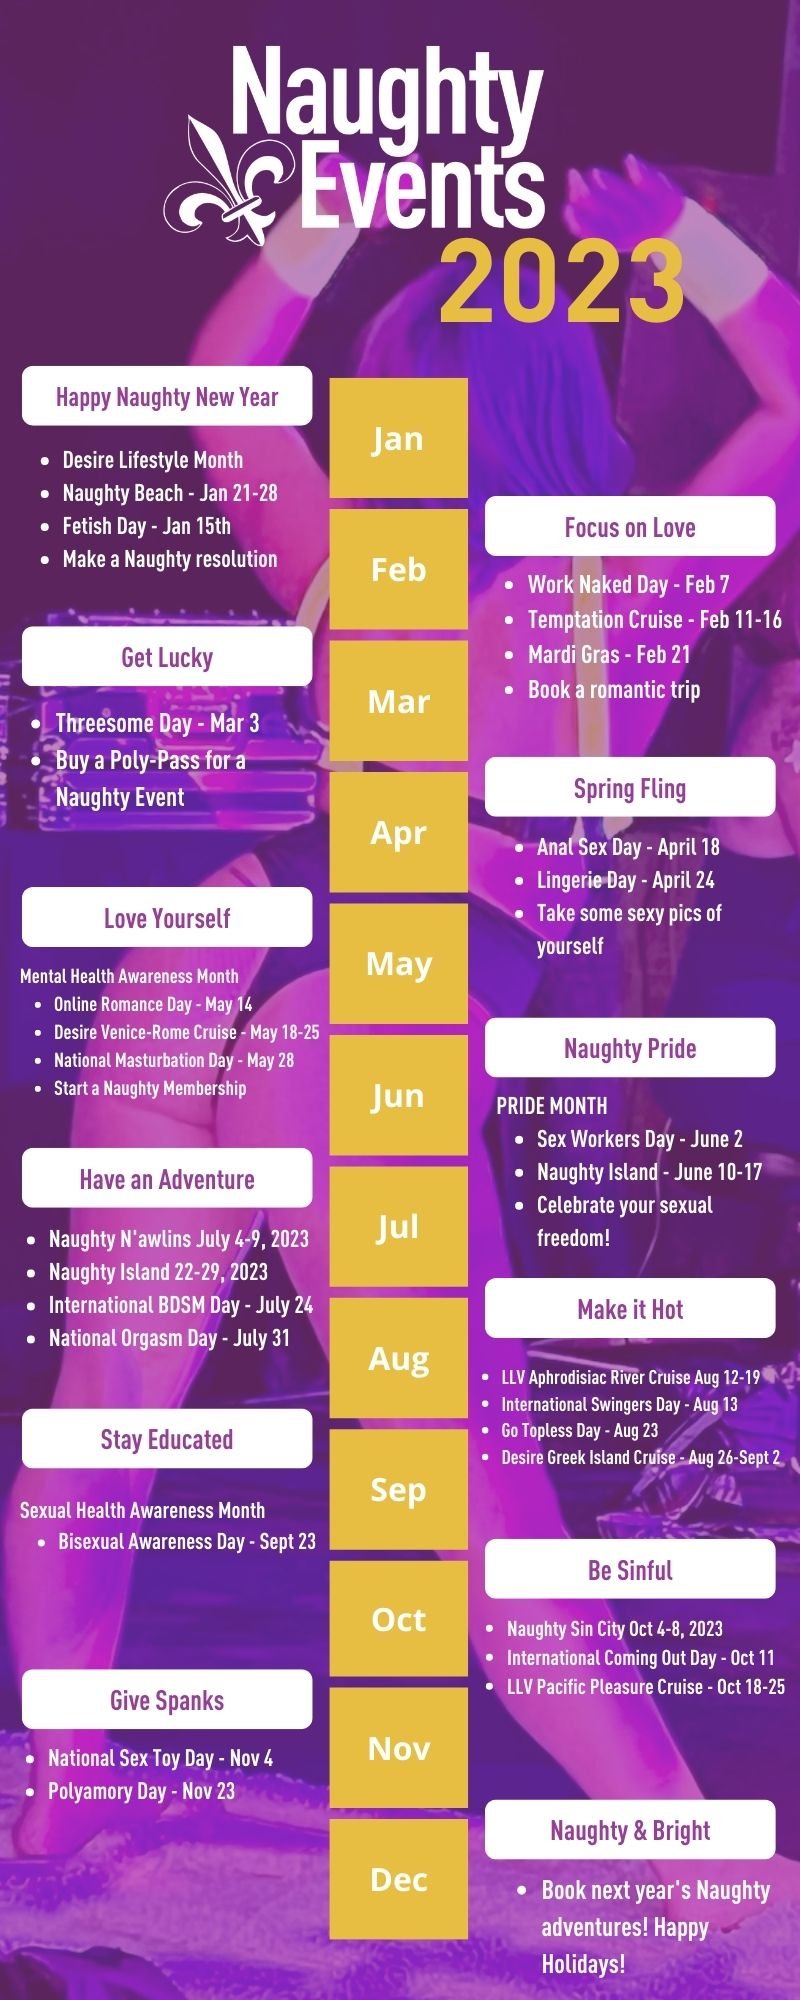 Naughty Events Calendar 2023 — NAUGHTY EVENTS pic